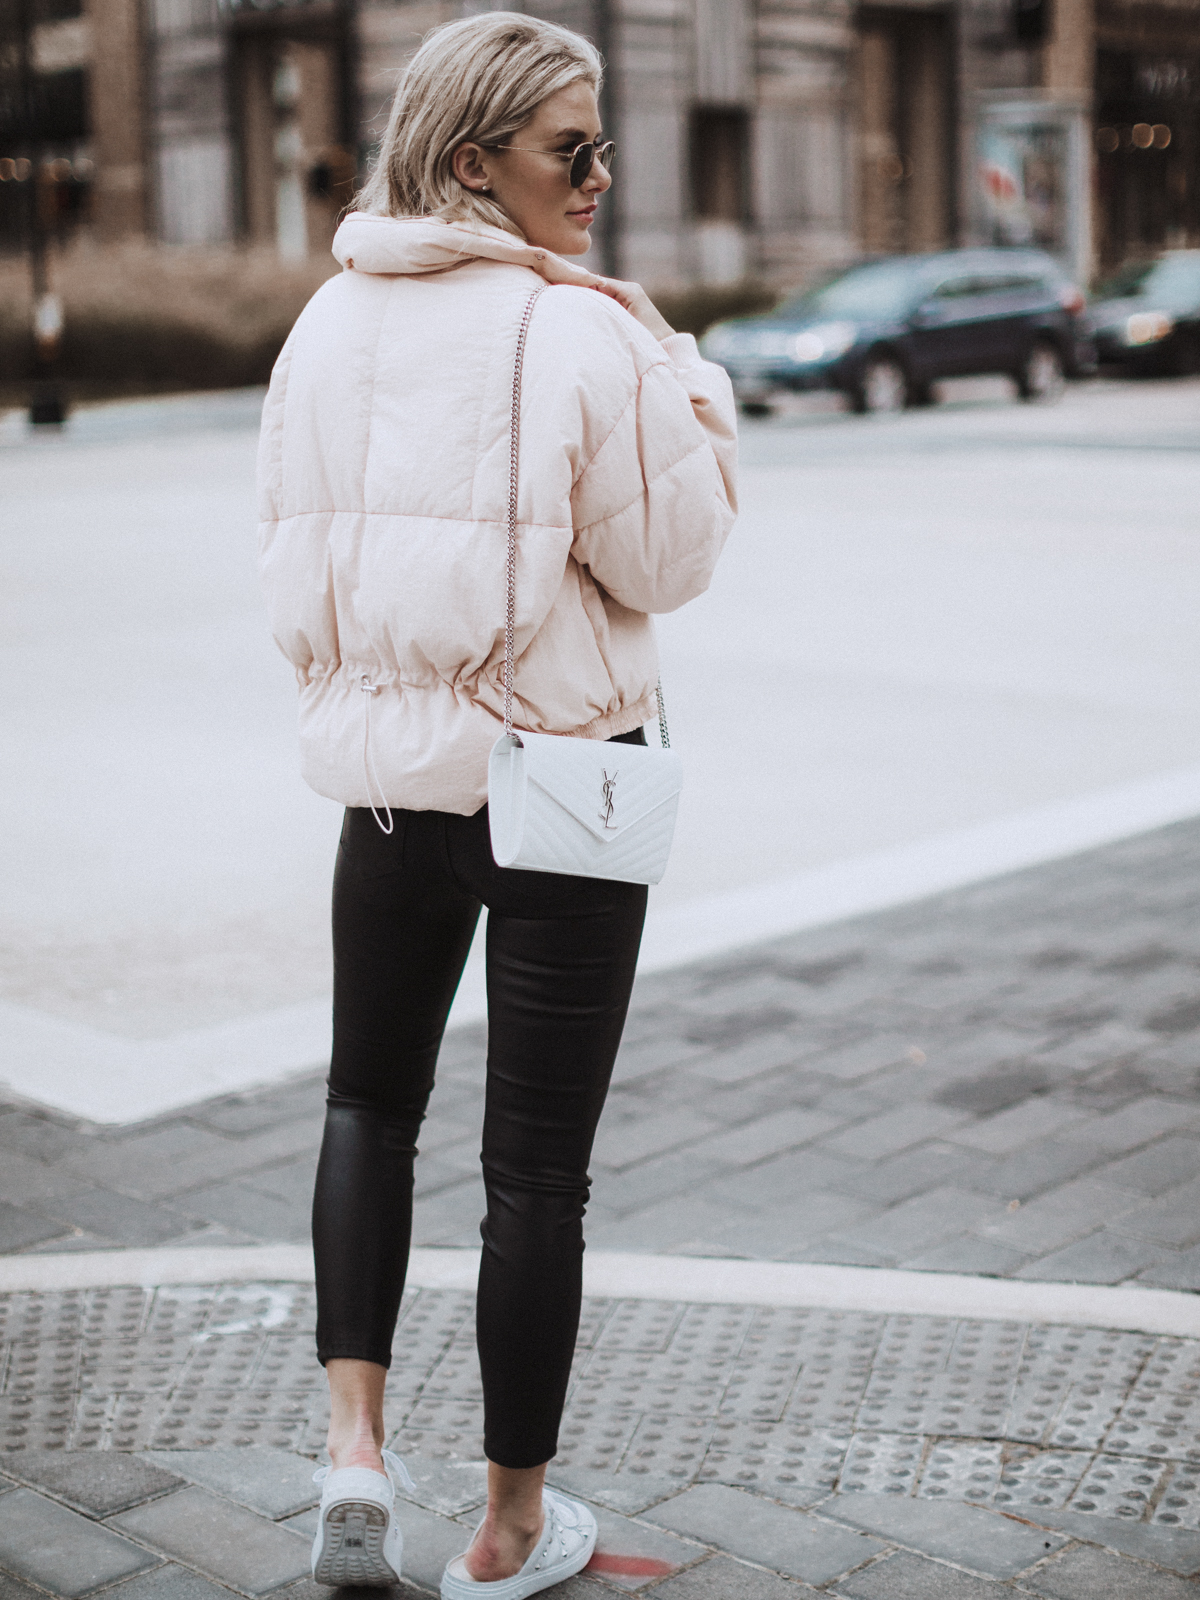 Sage Coralli in a pink puffer jacket and leather pants outfit